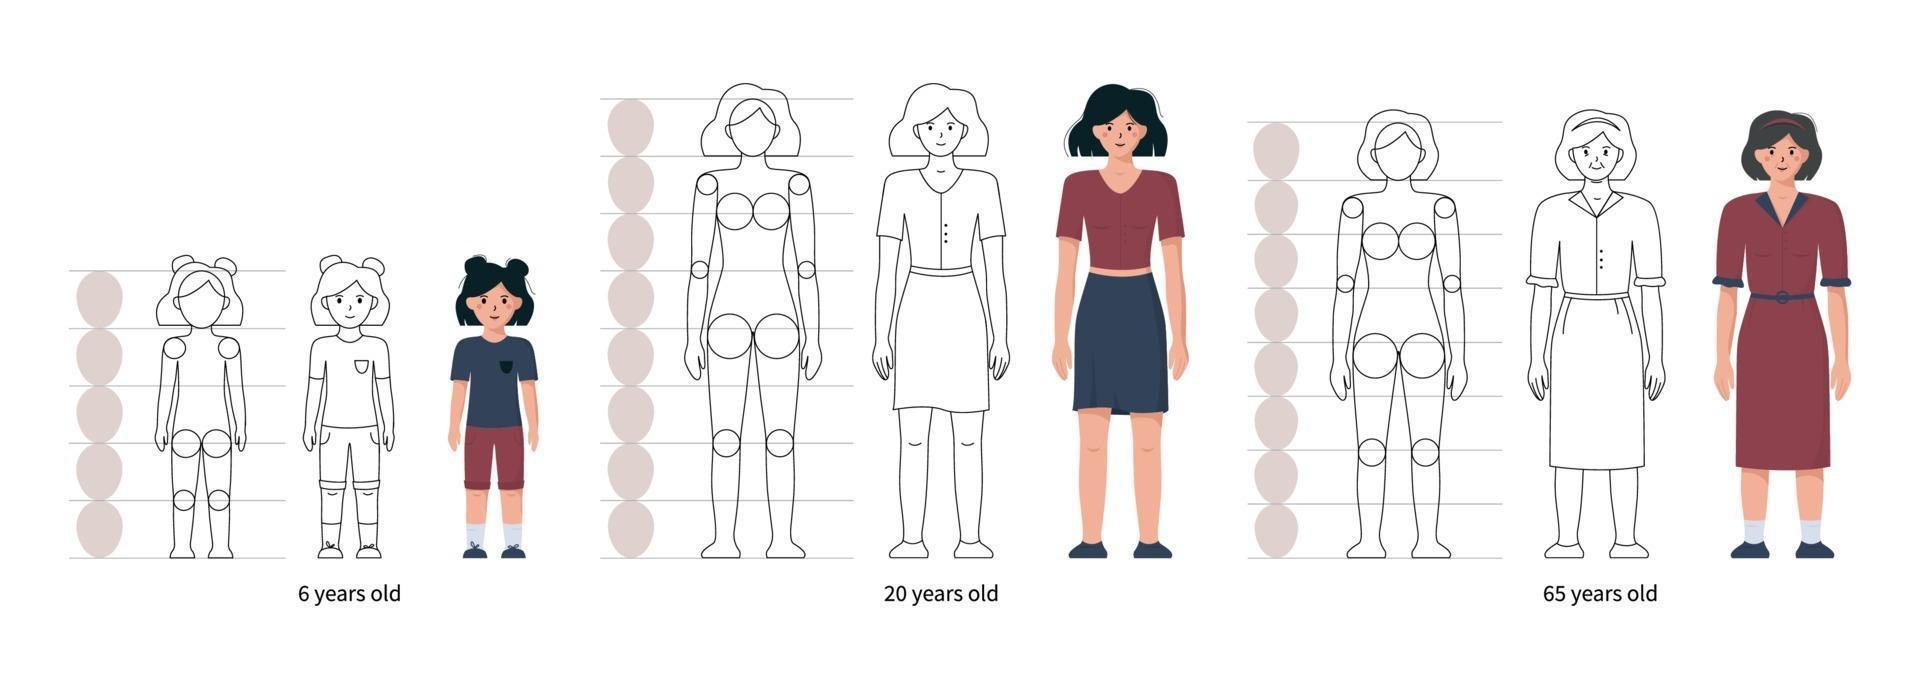 How to draw a woman at different ages tutorial vector